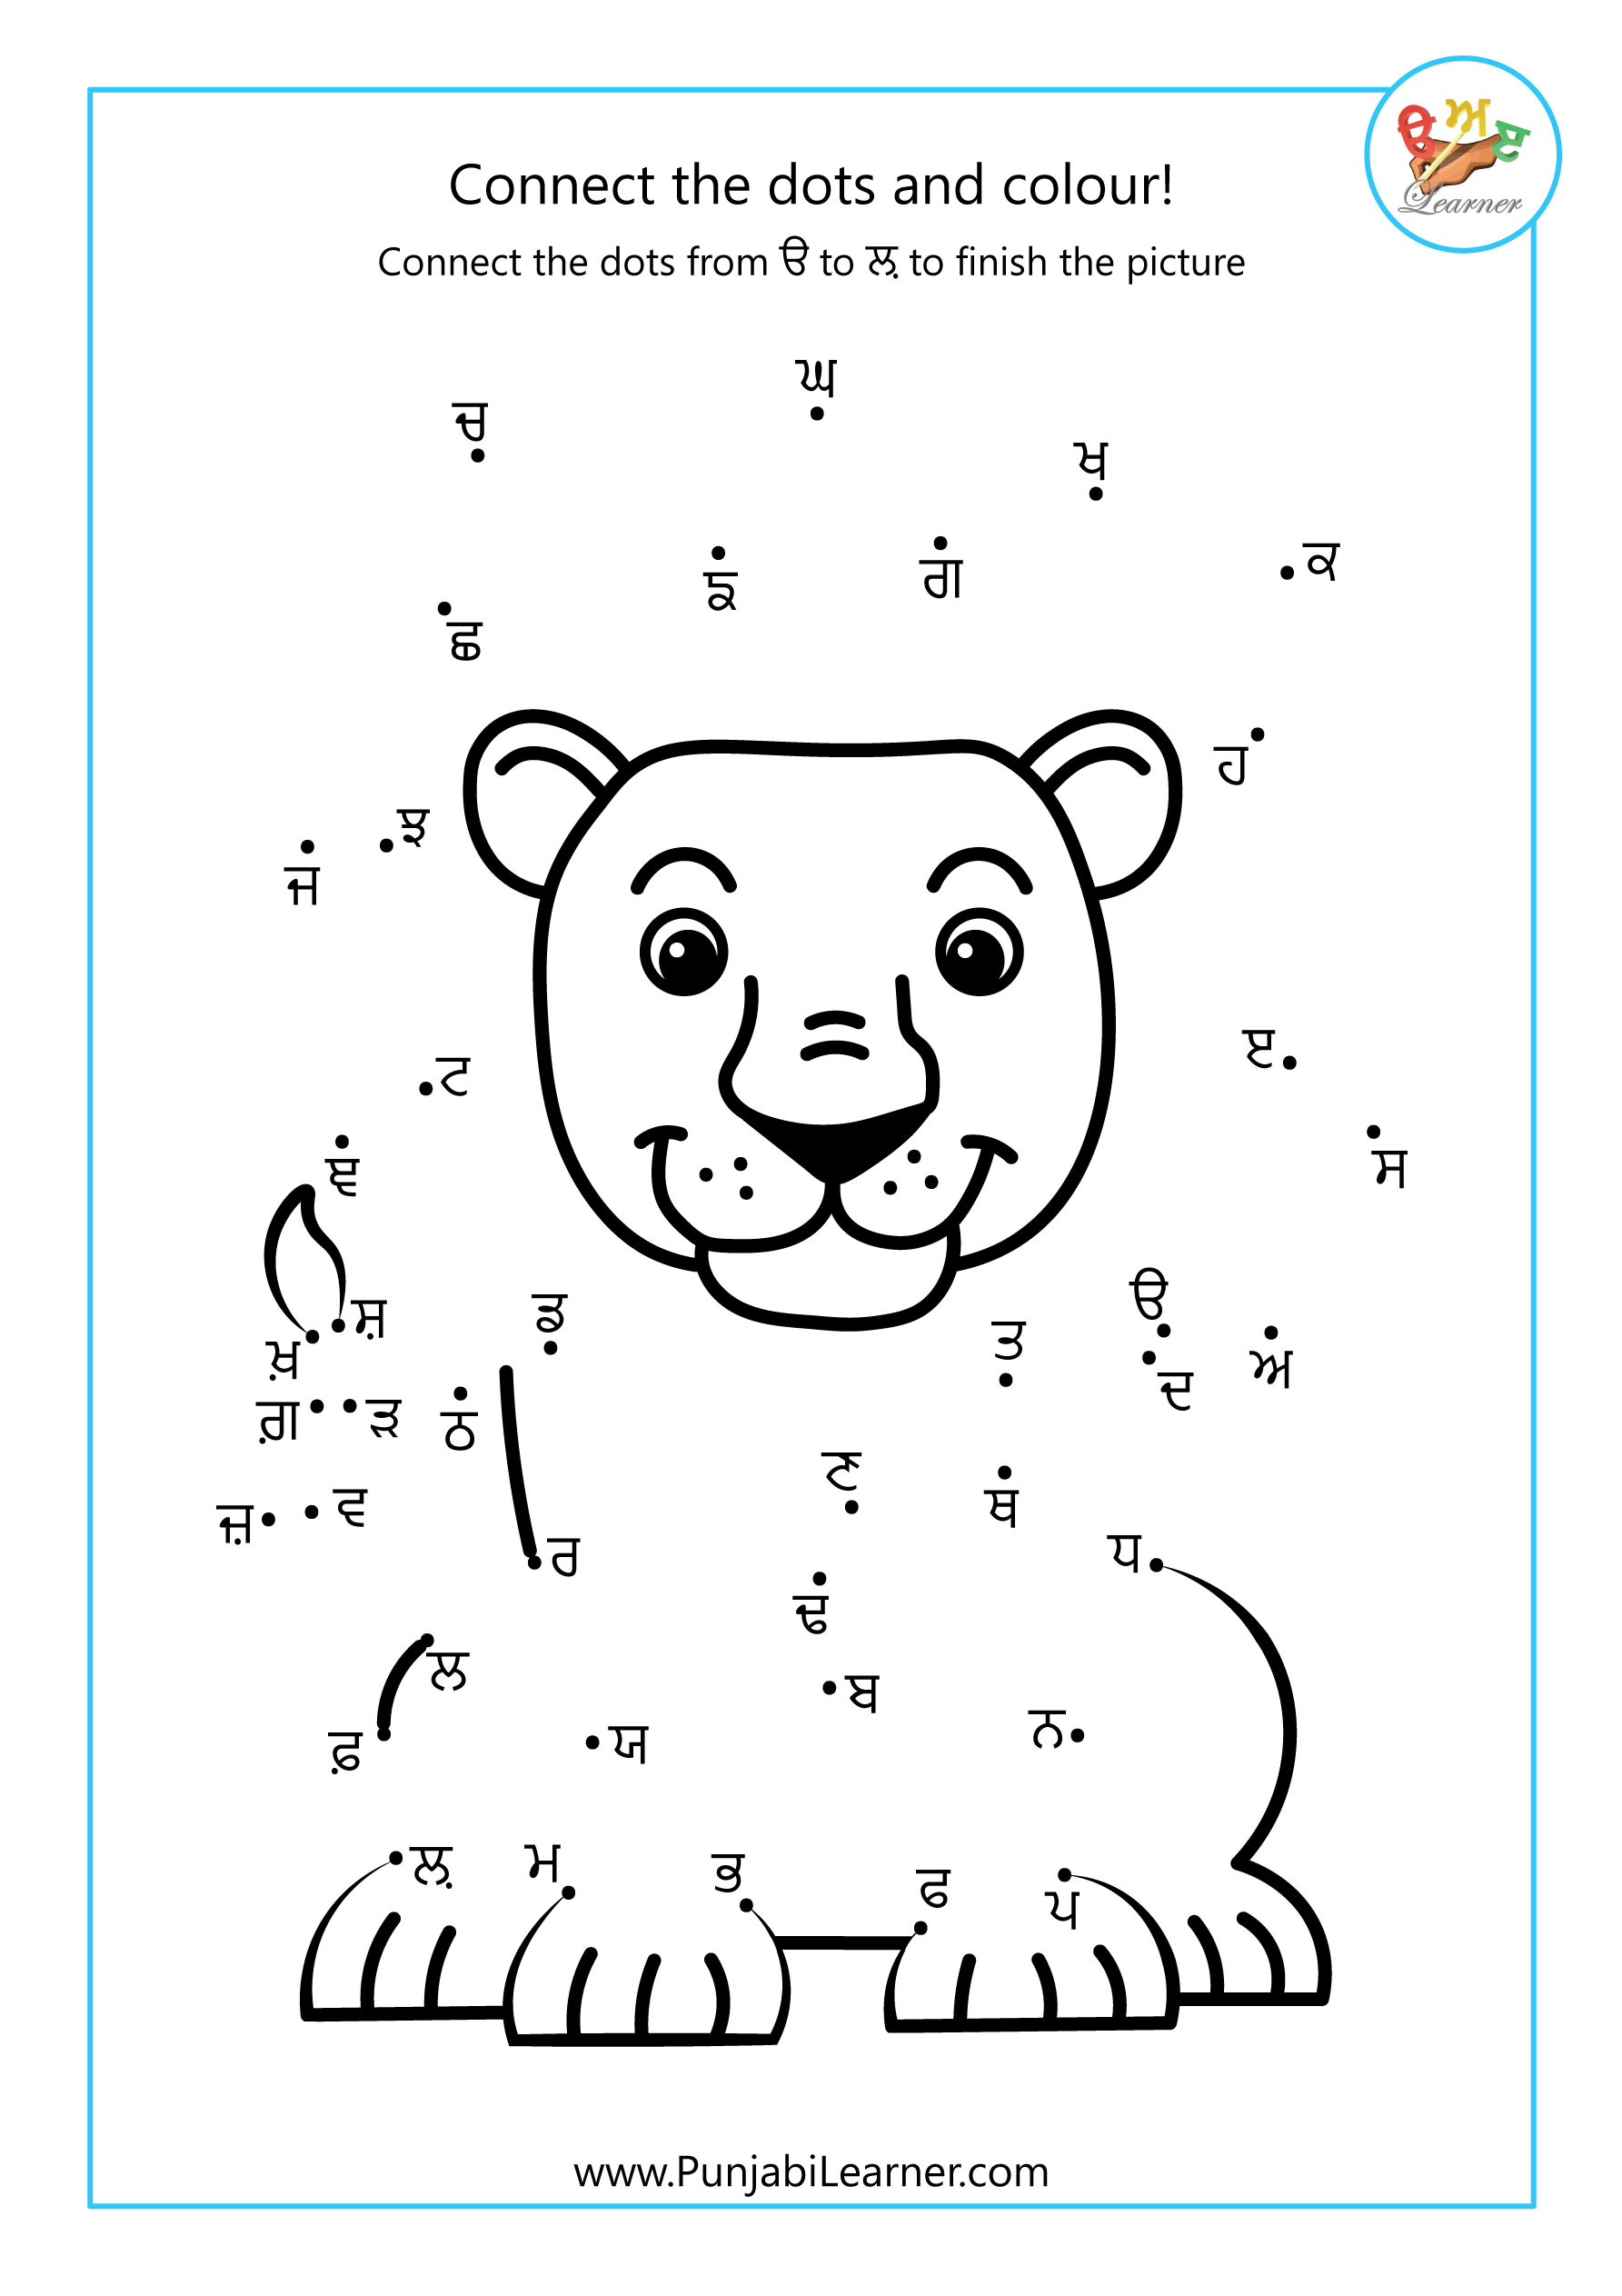 Connect-the-dots and colour worksheet